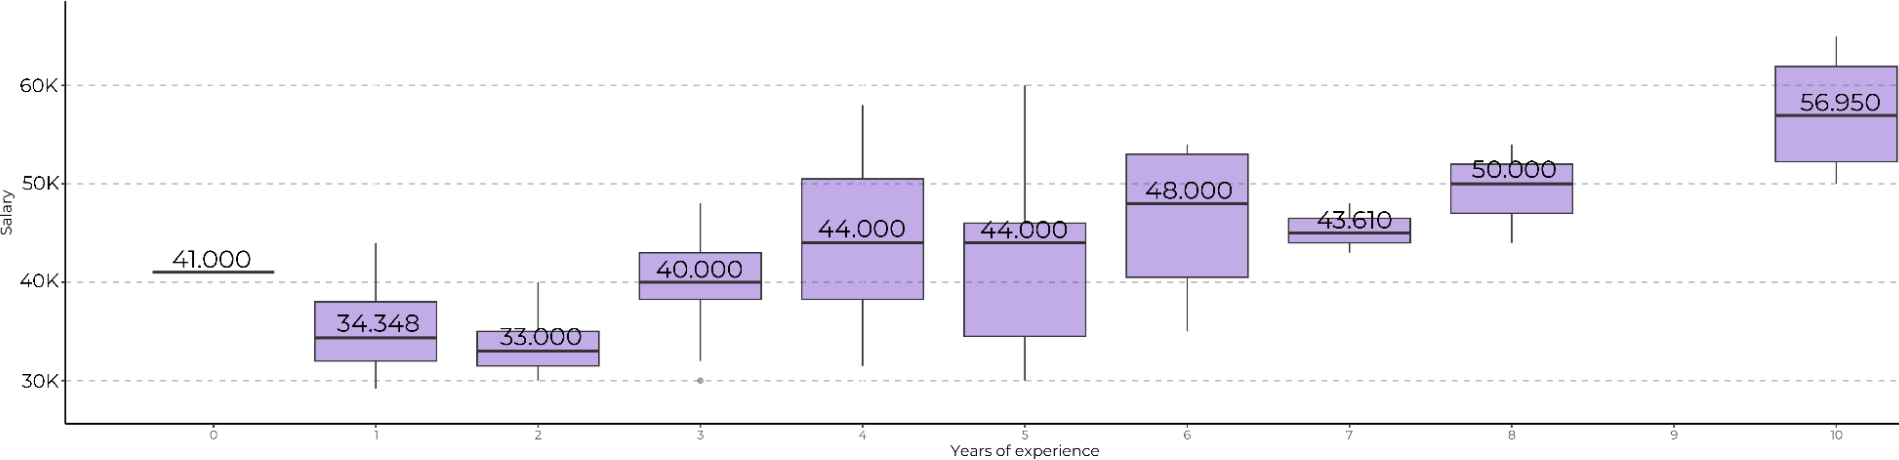 Graph showing salary ranges by years of experience for Product designers.